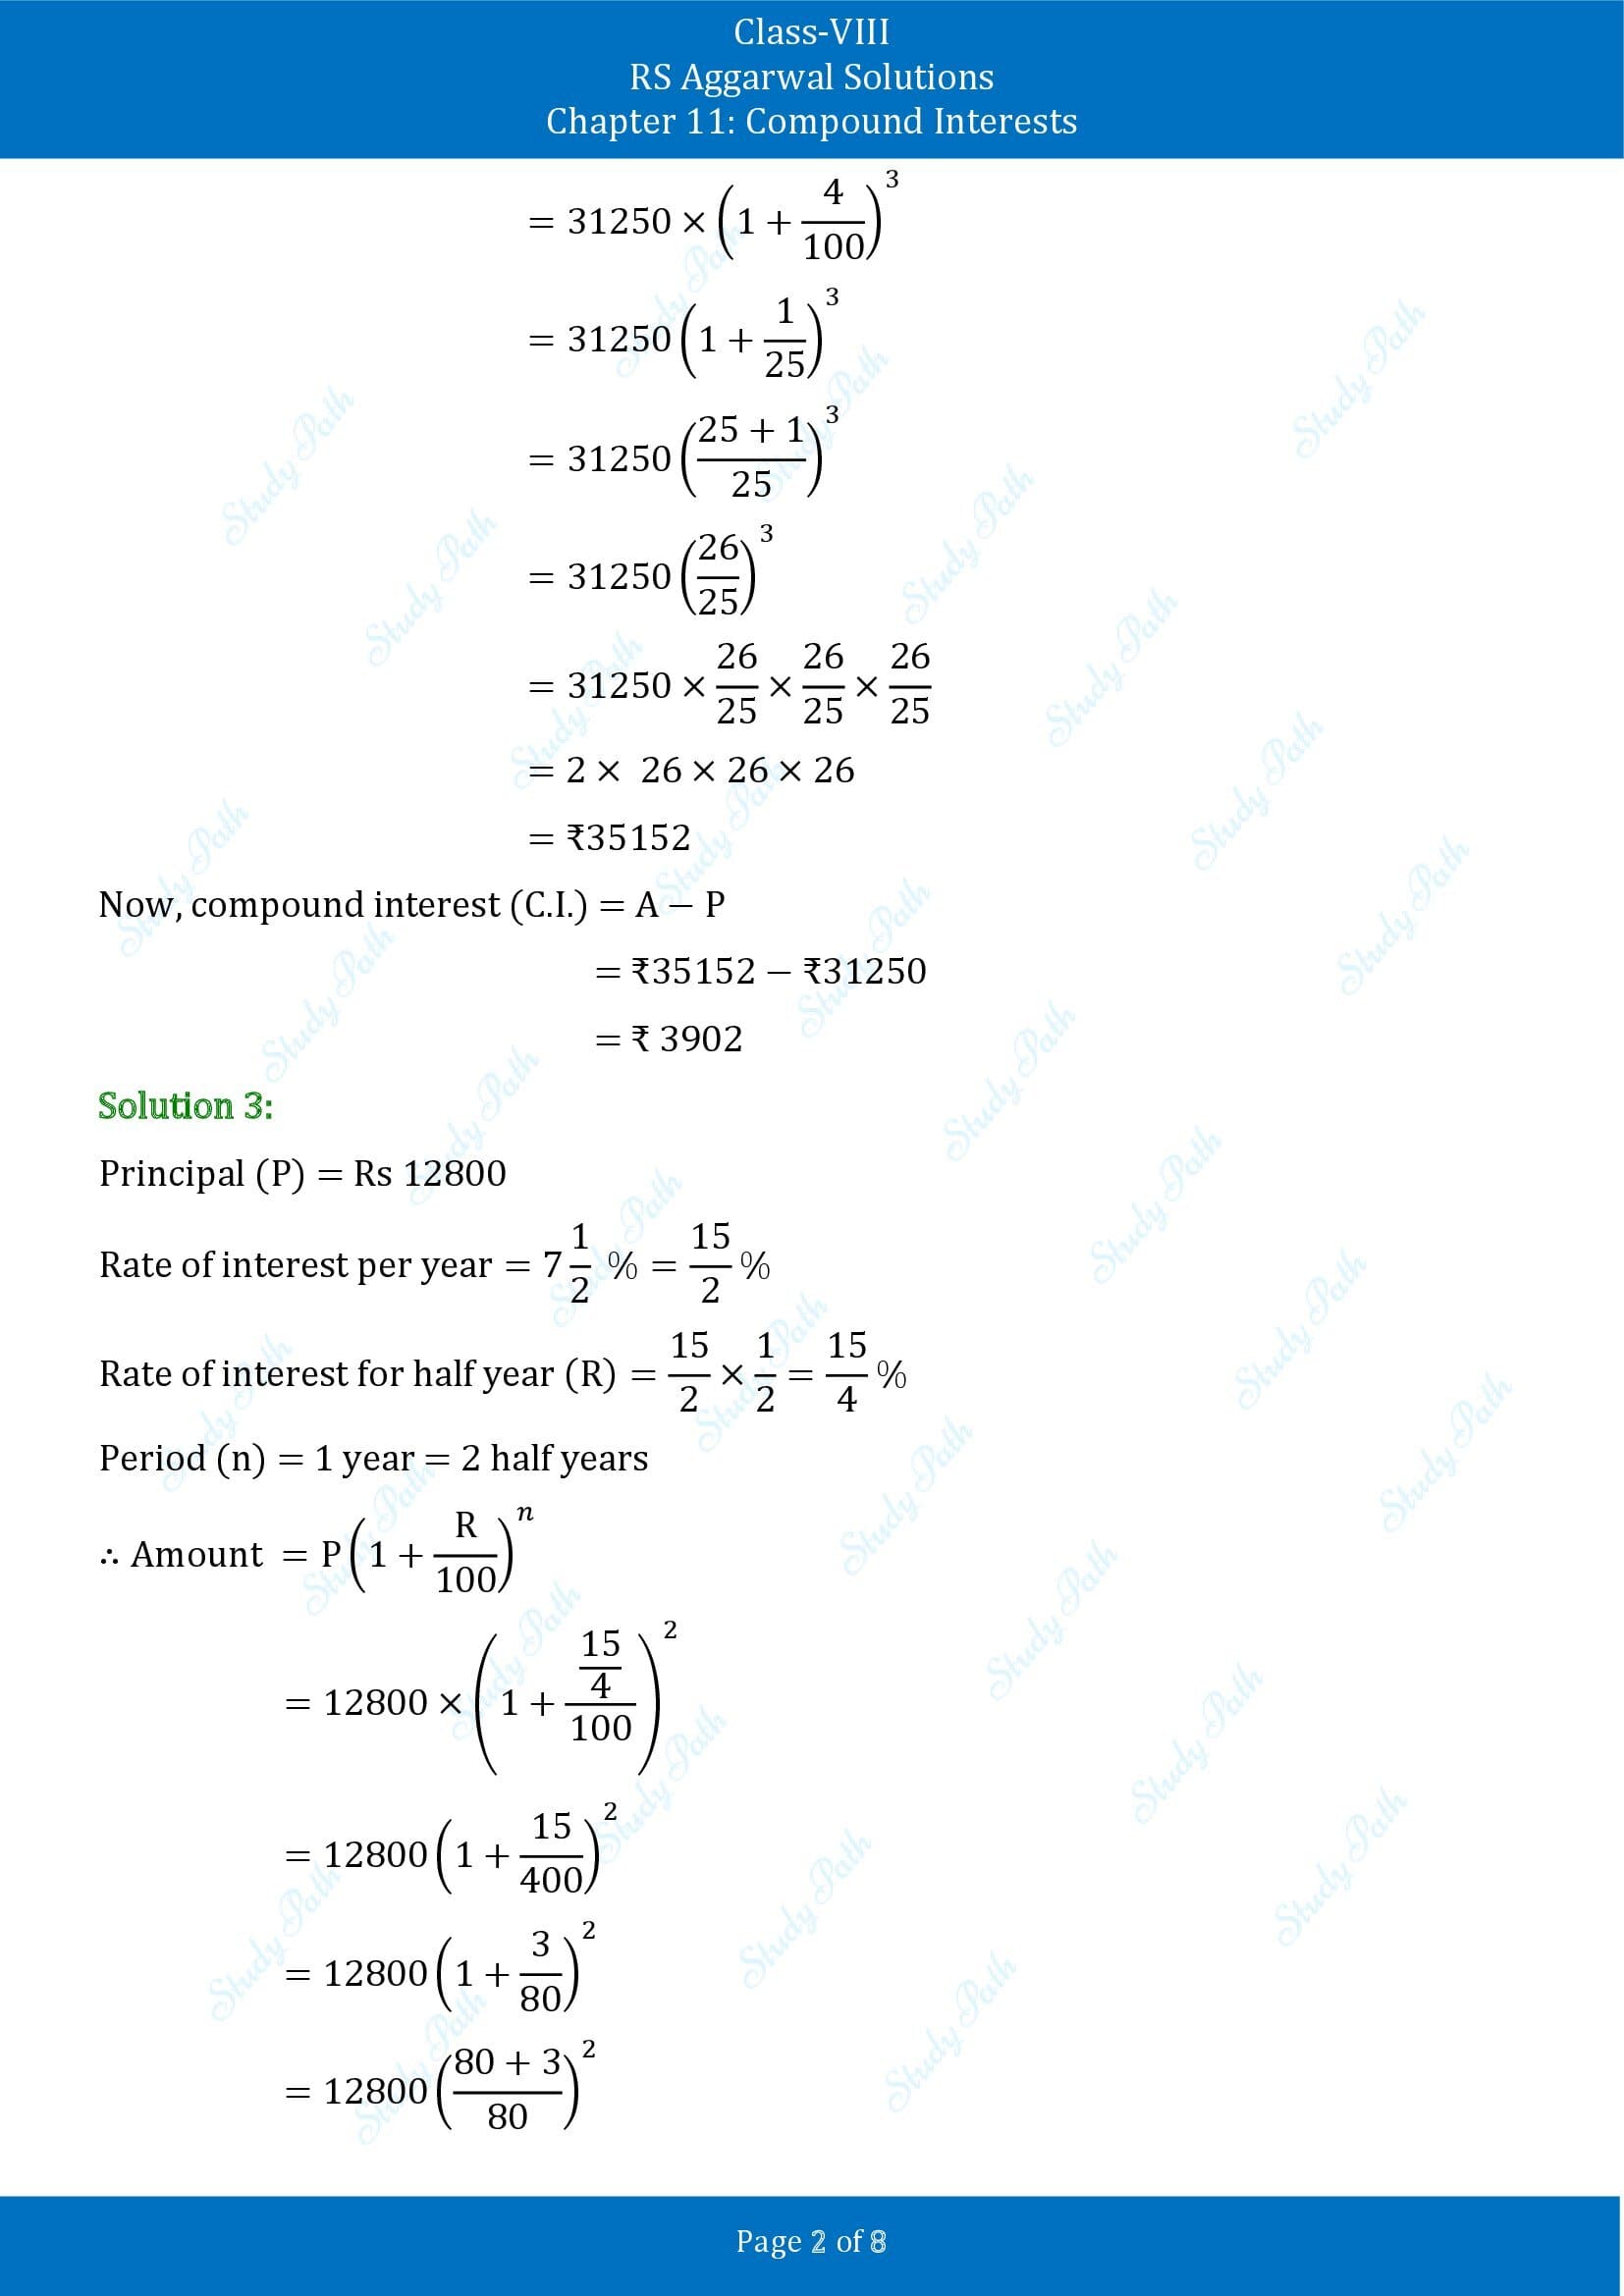 RS Aggarwal Solutions Class 8 Chapter 11 Compound Interests Exercise 11C 002